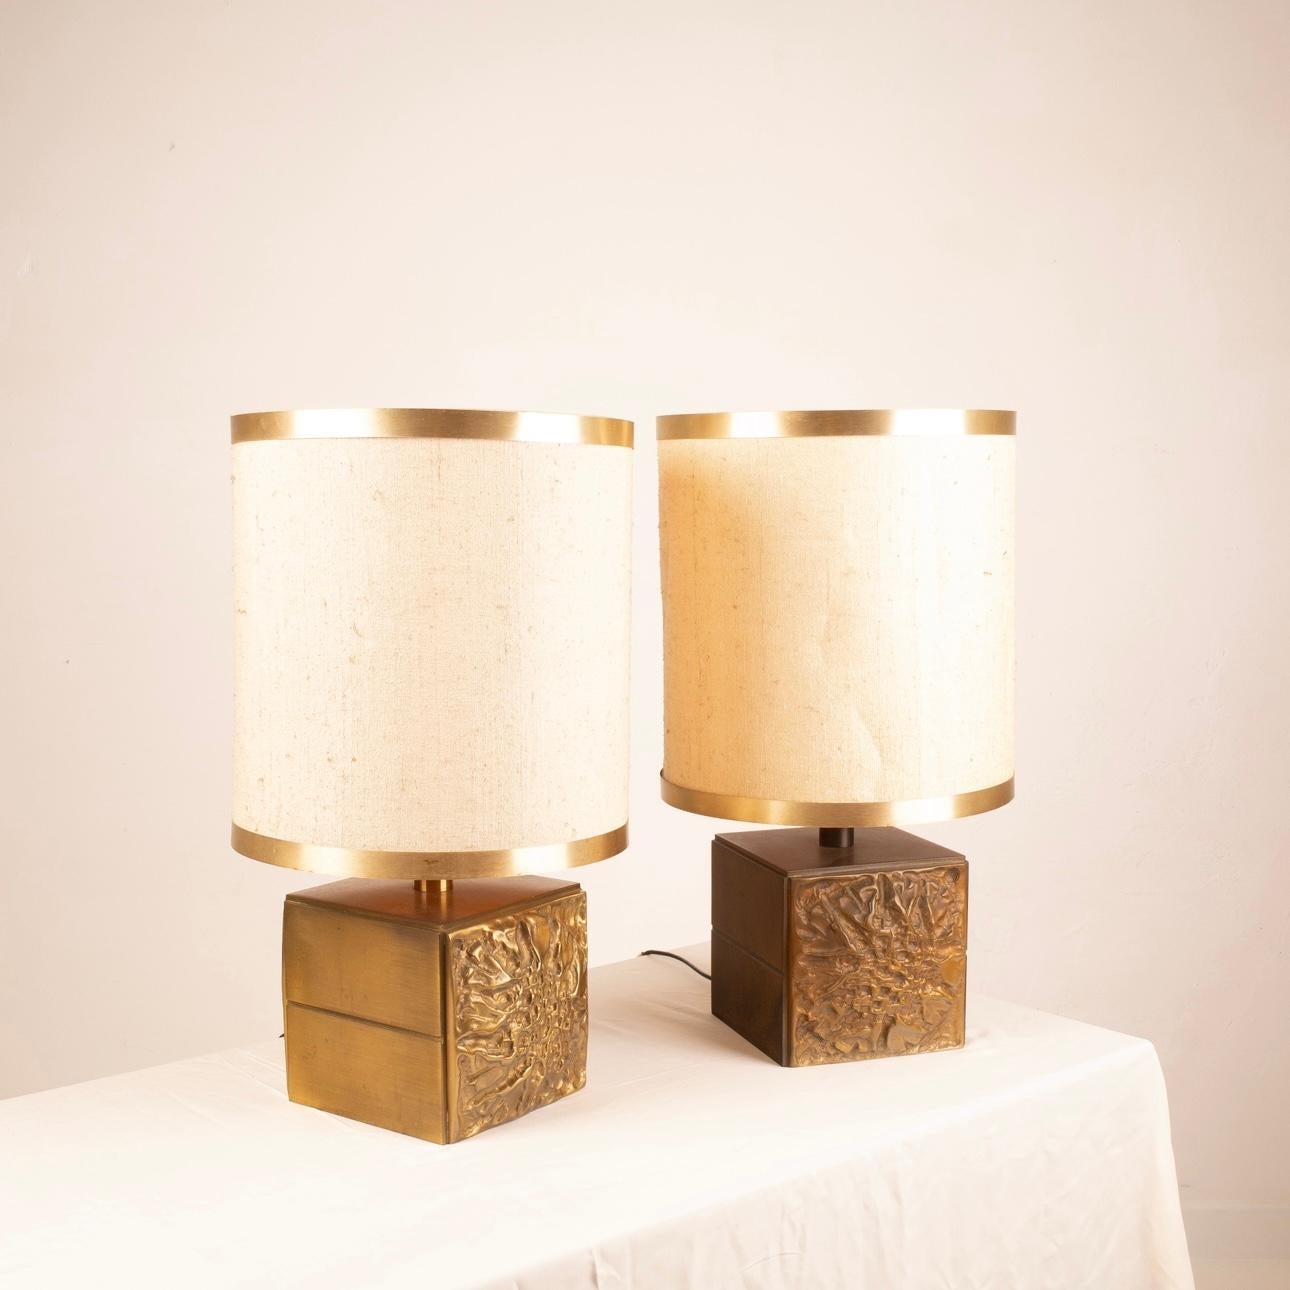 Pair of Brutalist Lamps by Luciano Frigerio for Frigerio of Desio For Sale 1